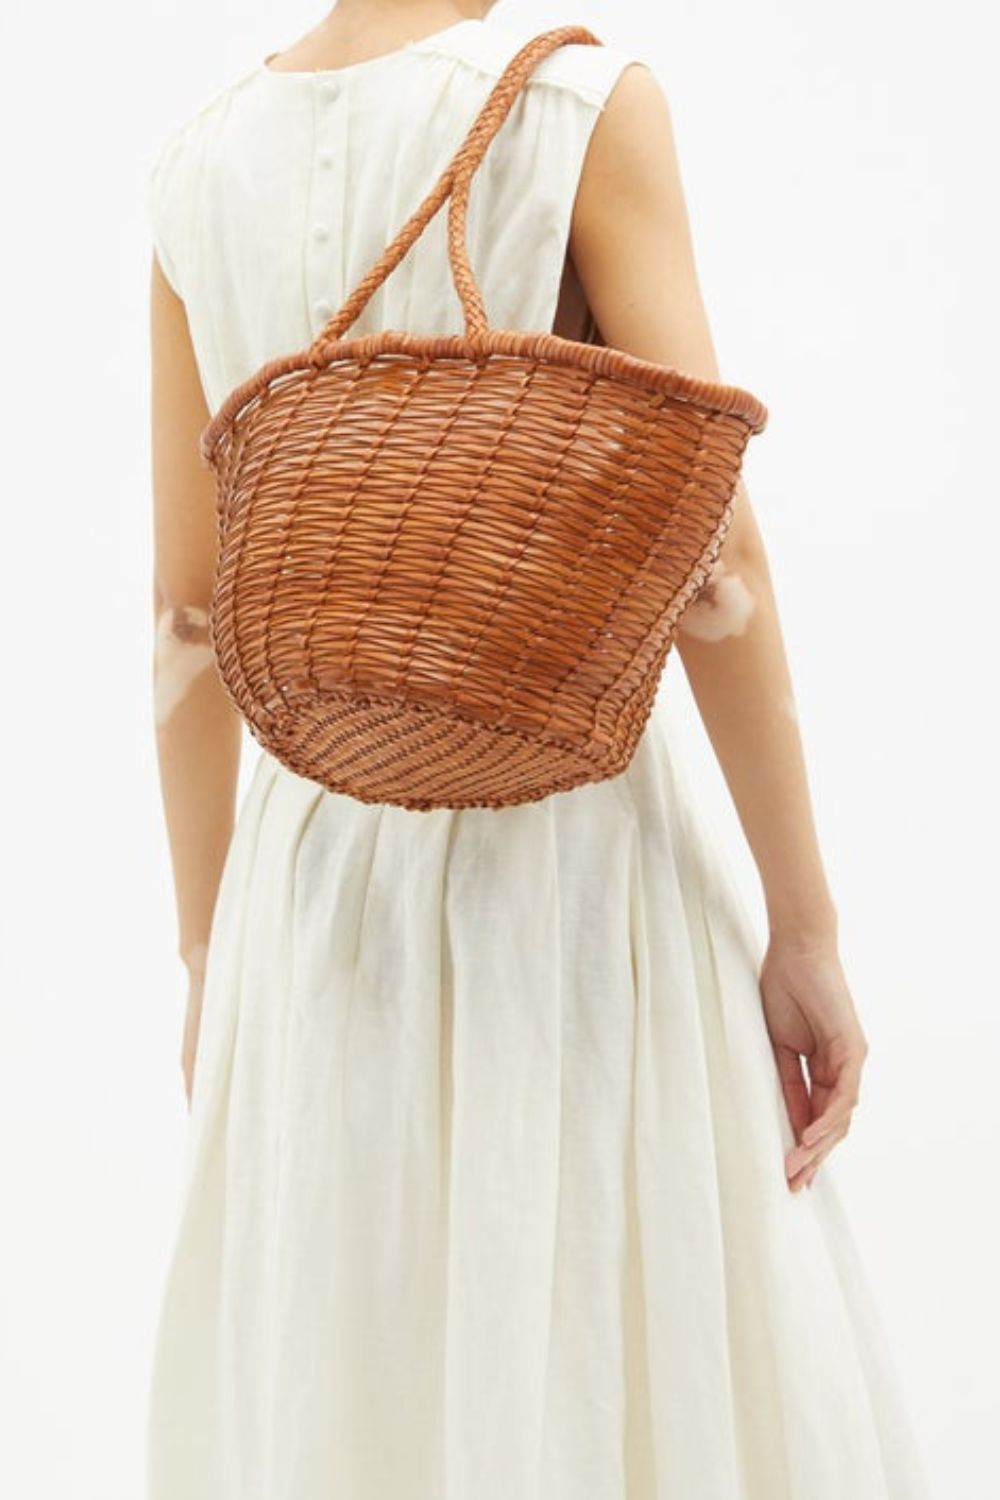 The-Gloss-Magazine-best-basket-bags-to-shop-in-the-sales-5